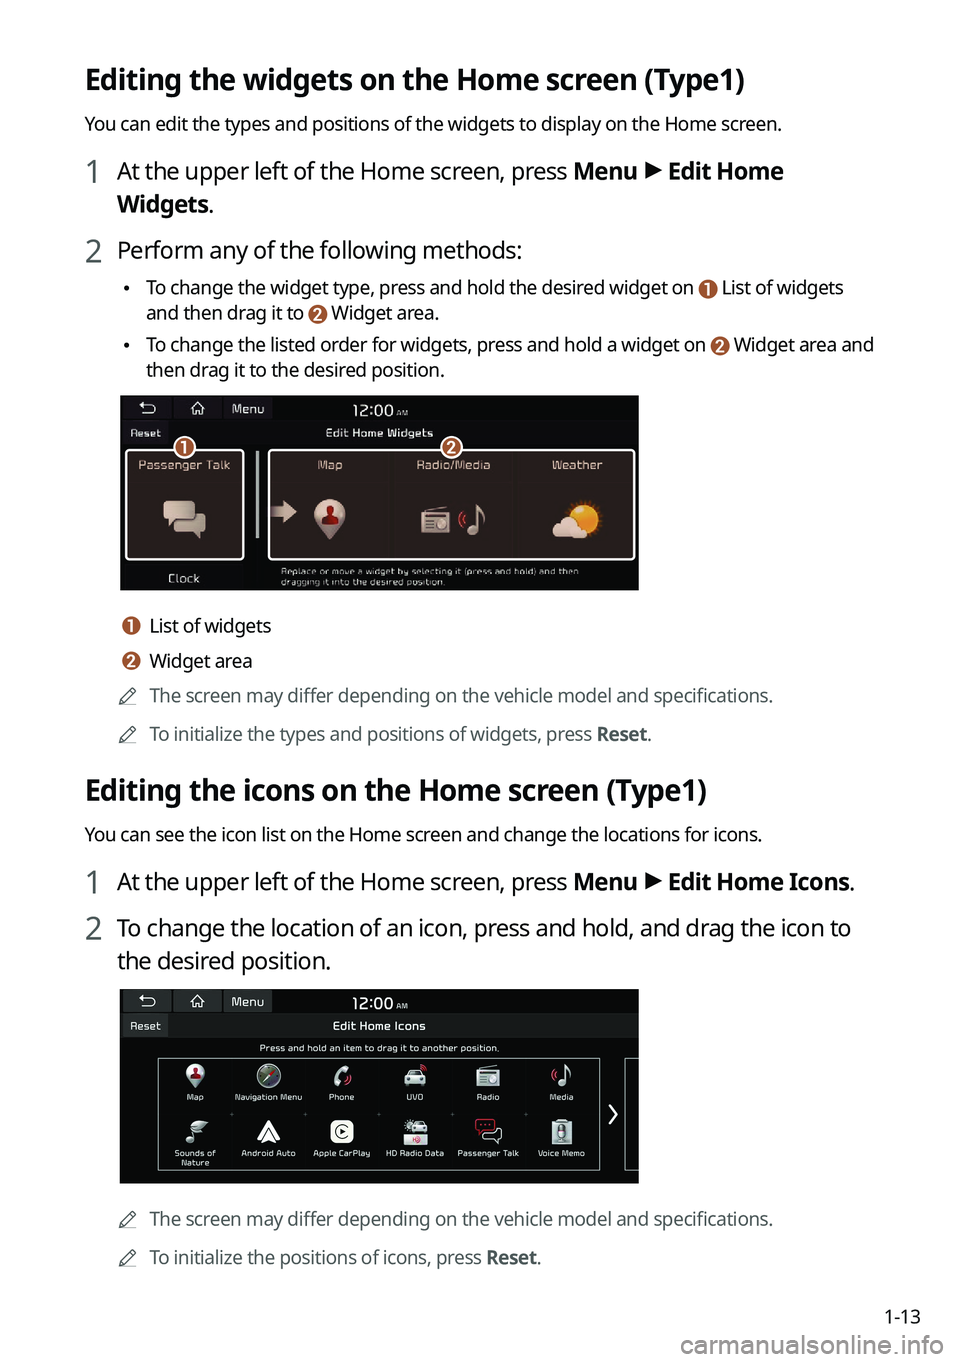 KIA K5 2022  Navigation System Quick Reference Guide 1-13
Editing the widgets on the Home screen (Type1)
You can edit the types and positions of the widgets to display on the Hom\
e screen.
1 At the upper left of the Home screen, press Menu >
 Edit Home